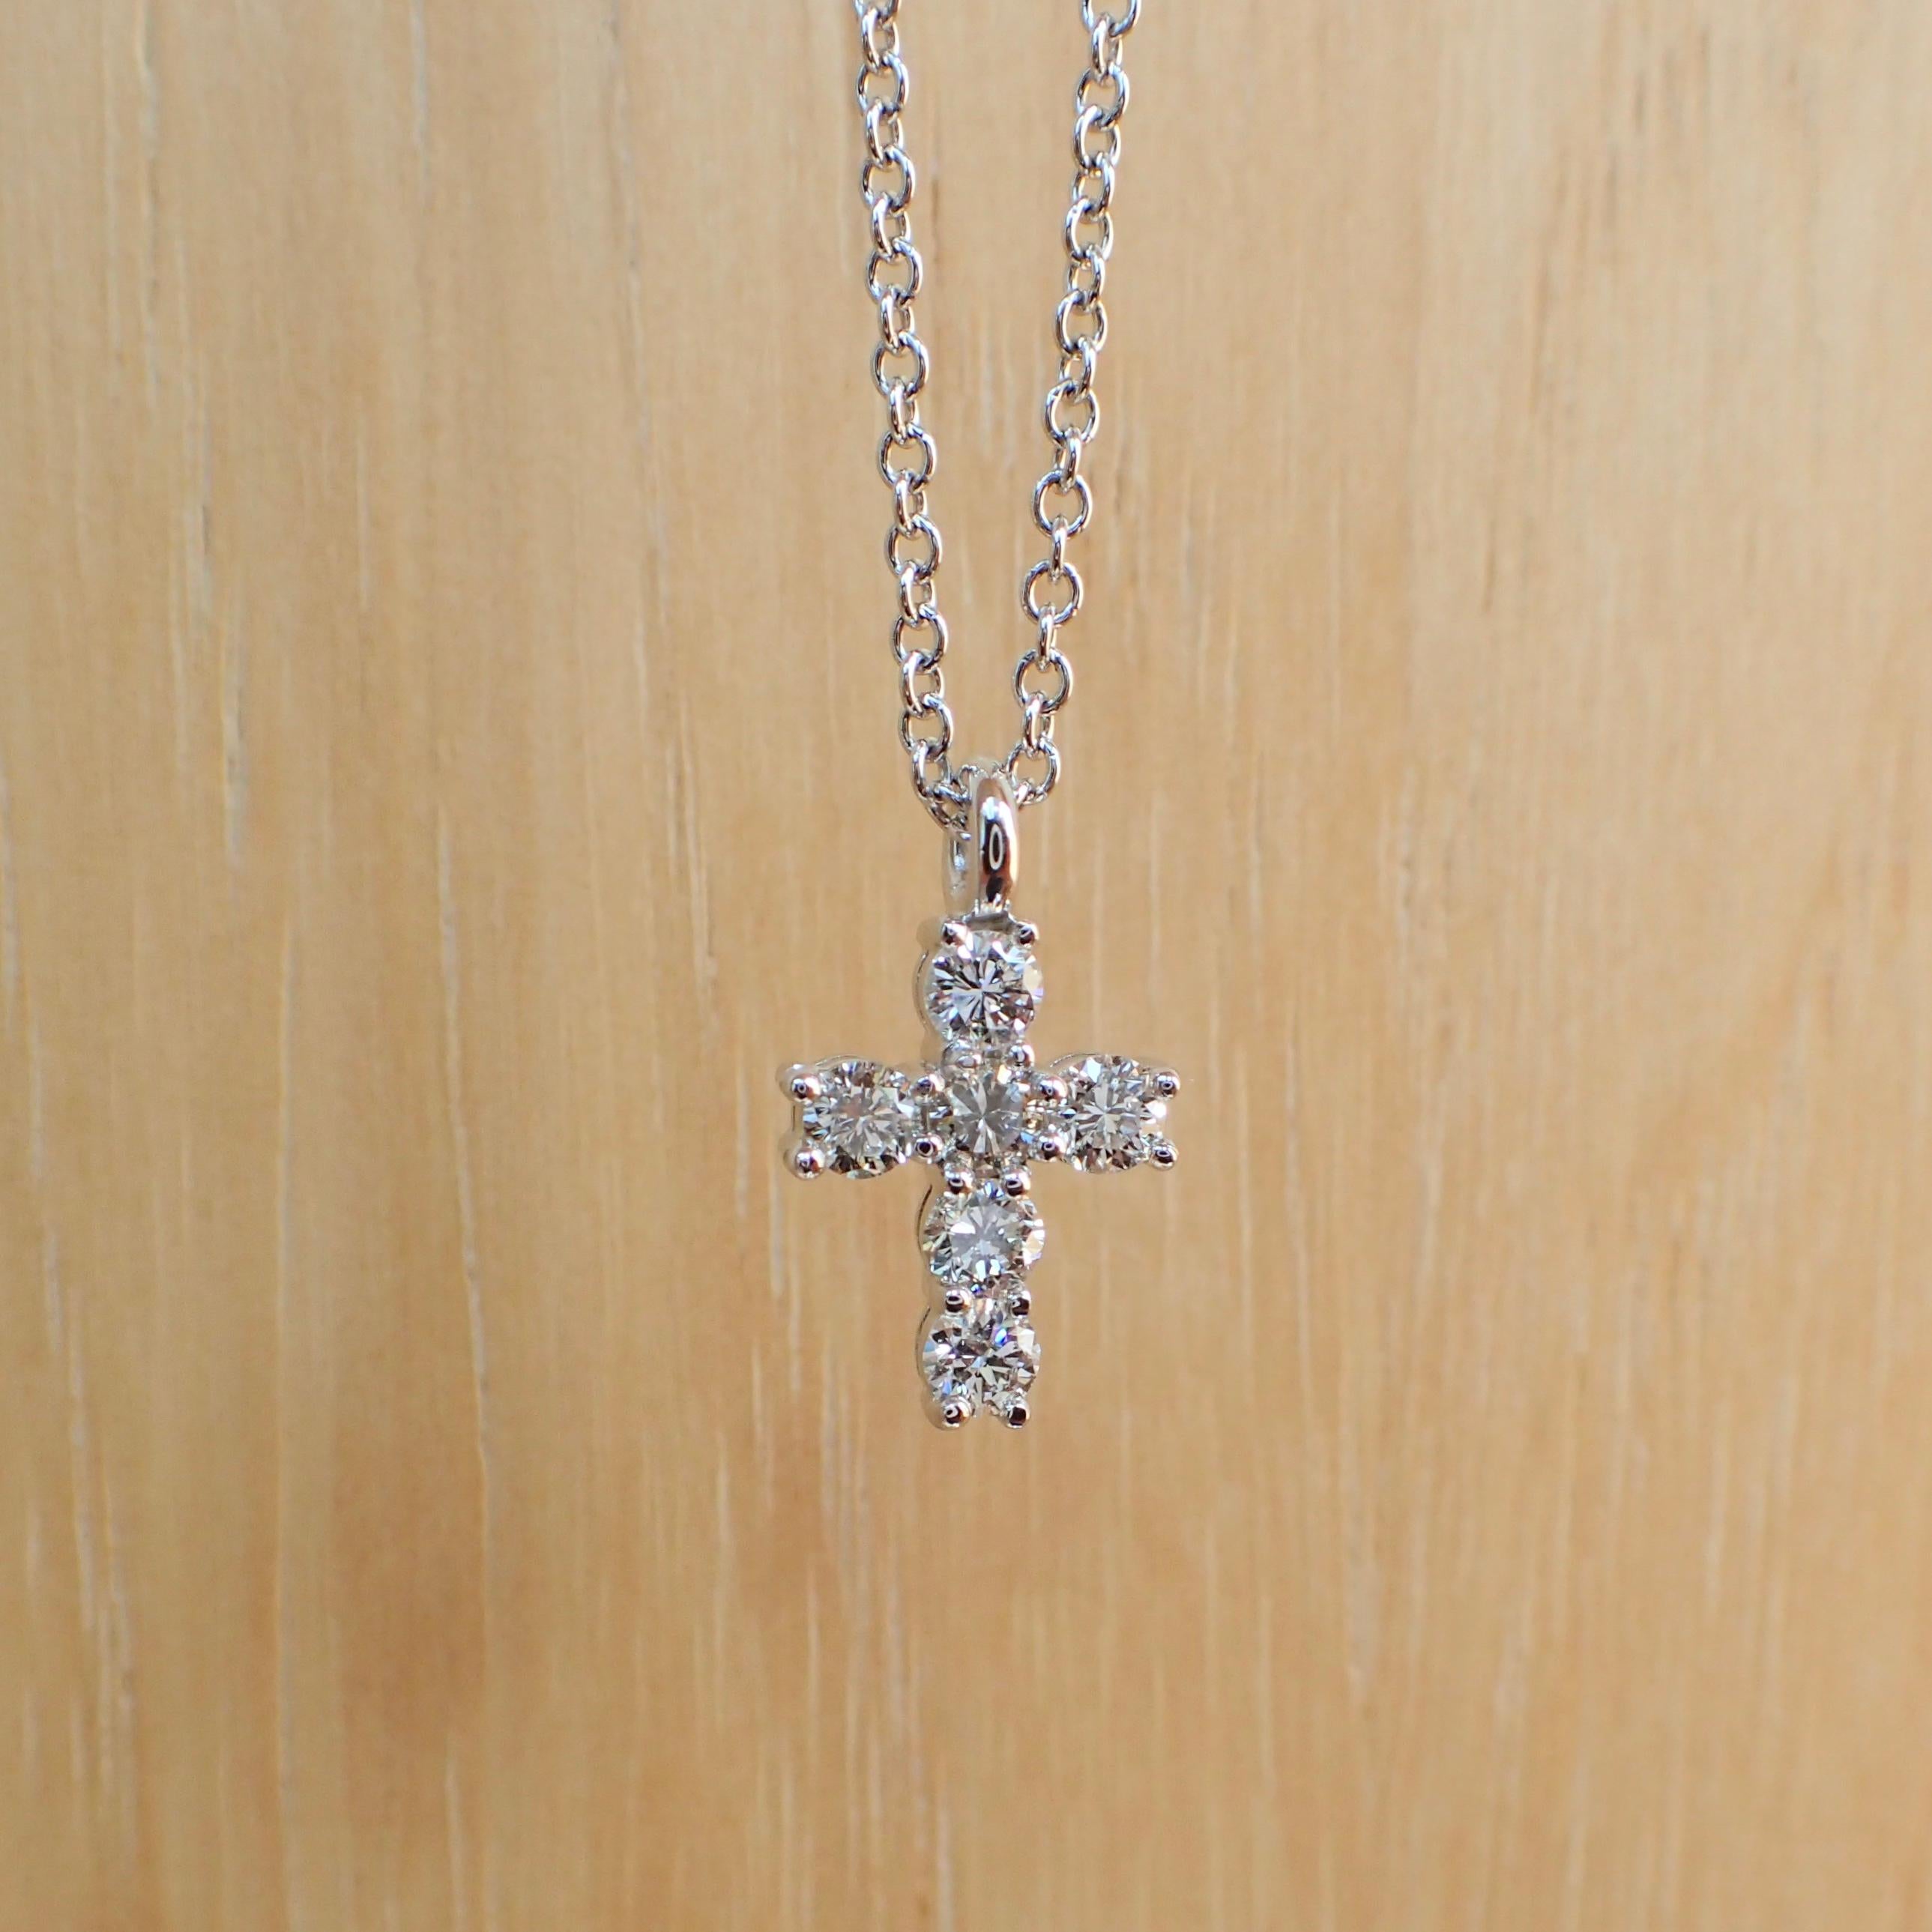 14k white gold tiny cross with six (6) Round Brilliant Cut diamonds weighing a total of 0.30 carats with Color Grade G-H and Clarity Grade SI. The cross hangs from a 16